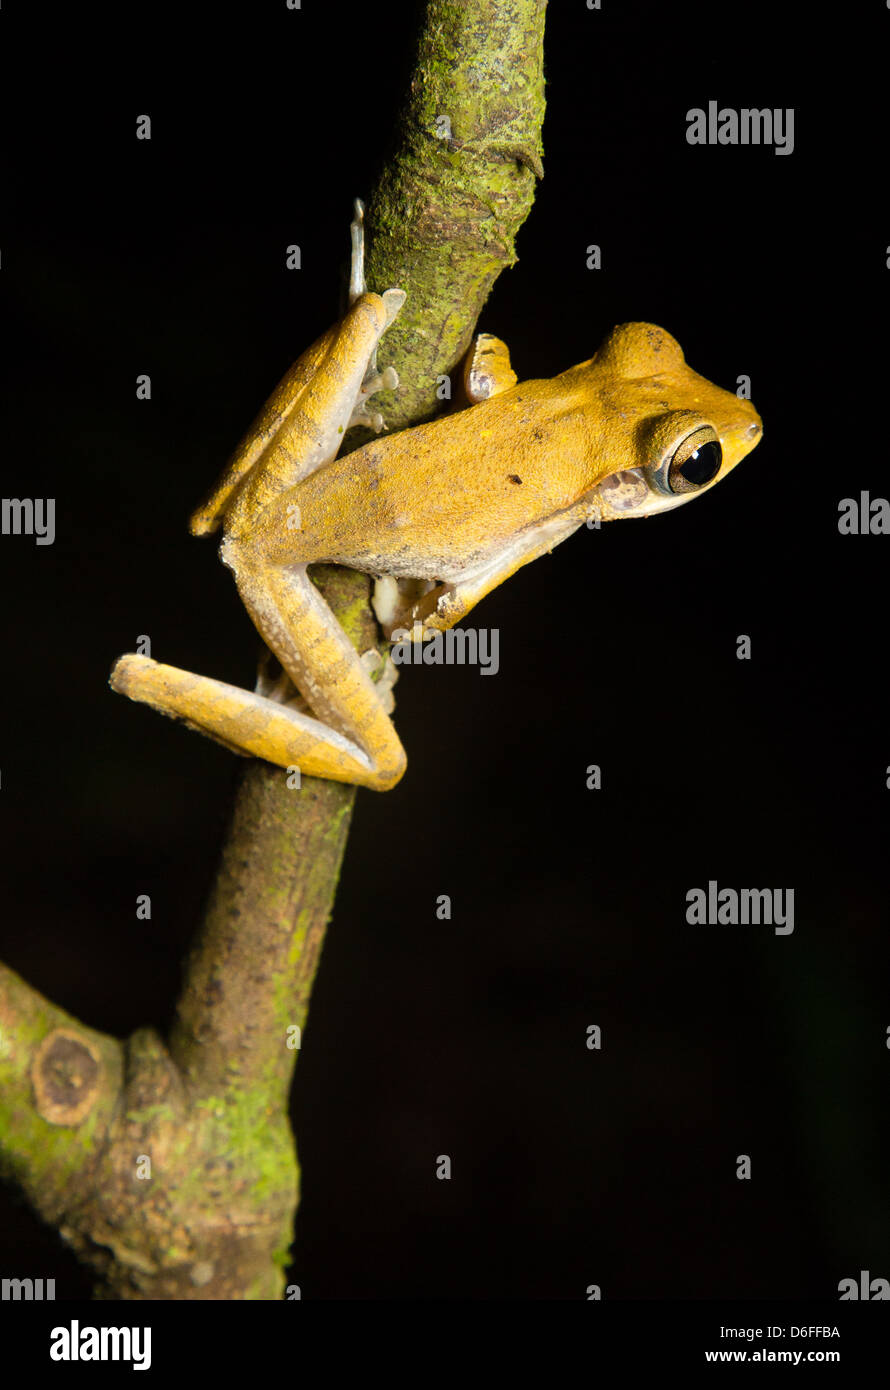 Tree Frog ( species unknown ) clinging to a branch above a pond in the Danum Valley Conservation Area in Sabah Borneo Stock Photo